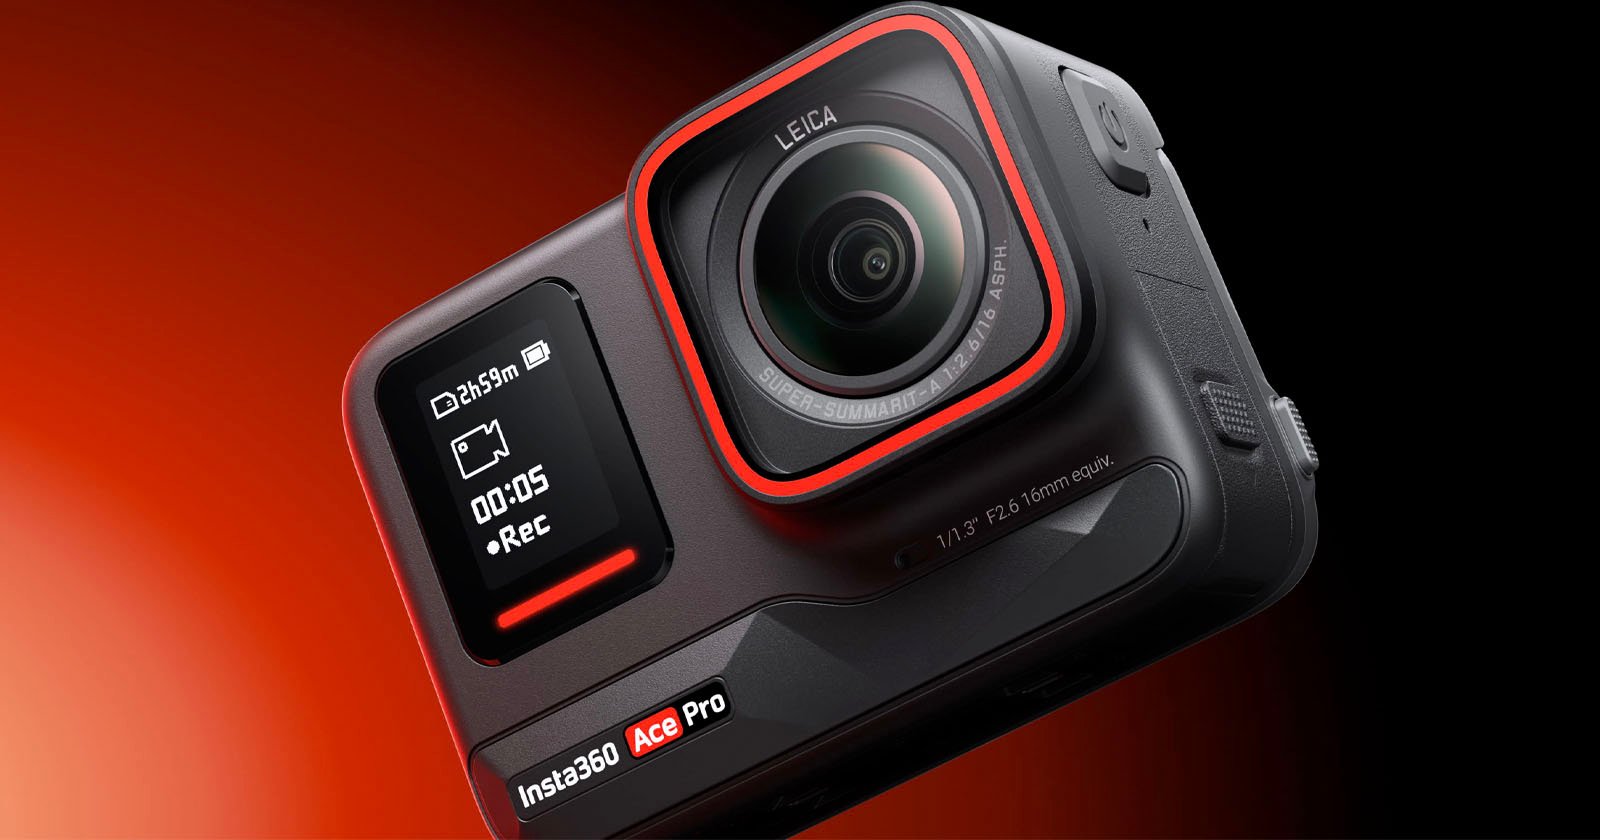 An insta360 ace pro action camera with a leica lens, displayed against a gradient orange and red background. the camera features prominent recording indicators and design elements in red.